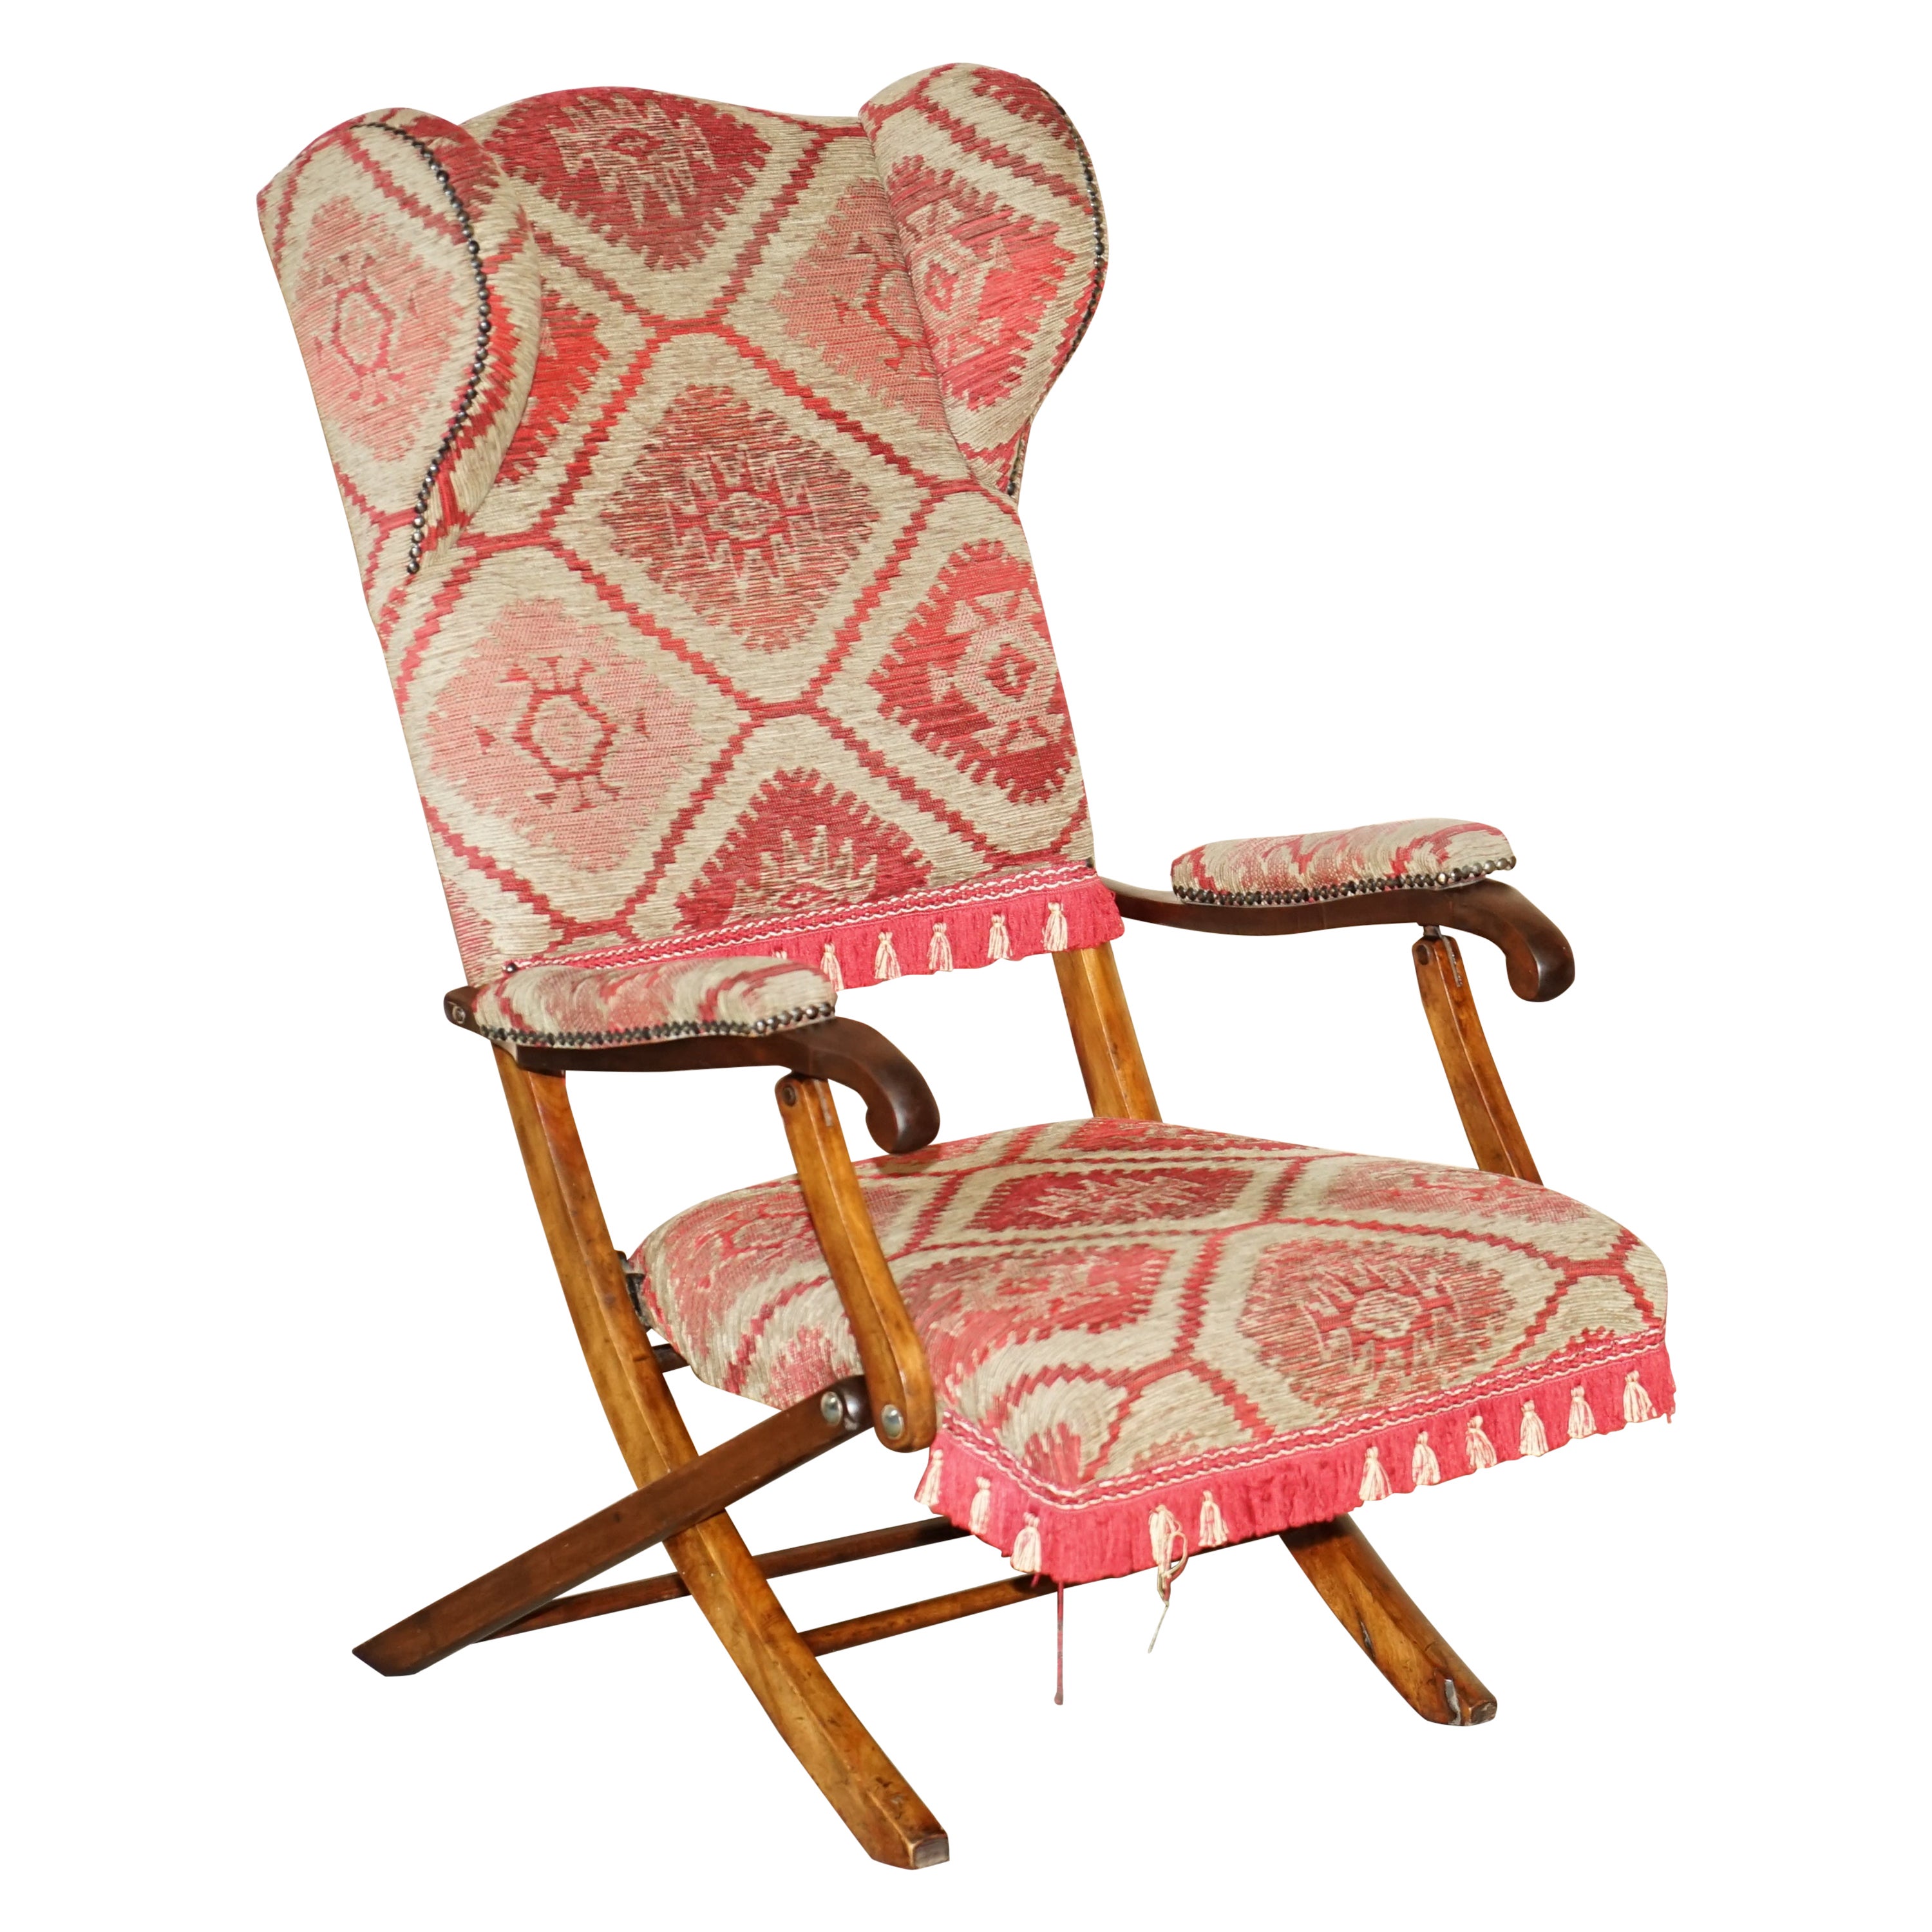 Stunning Antique Victorian Military Campaign Kilim Upholstered Folding Armchair For Sale